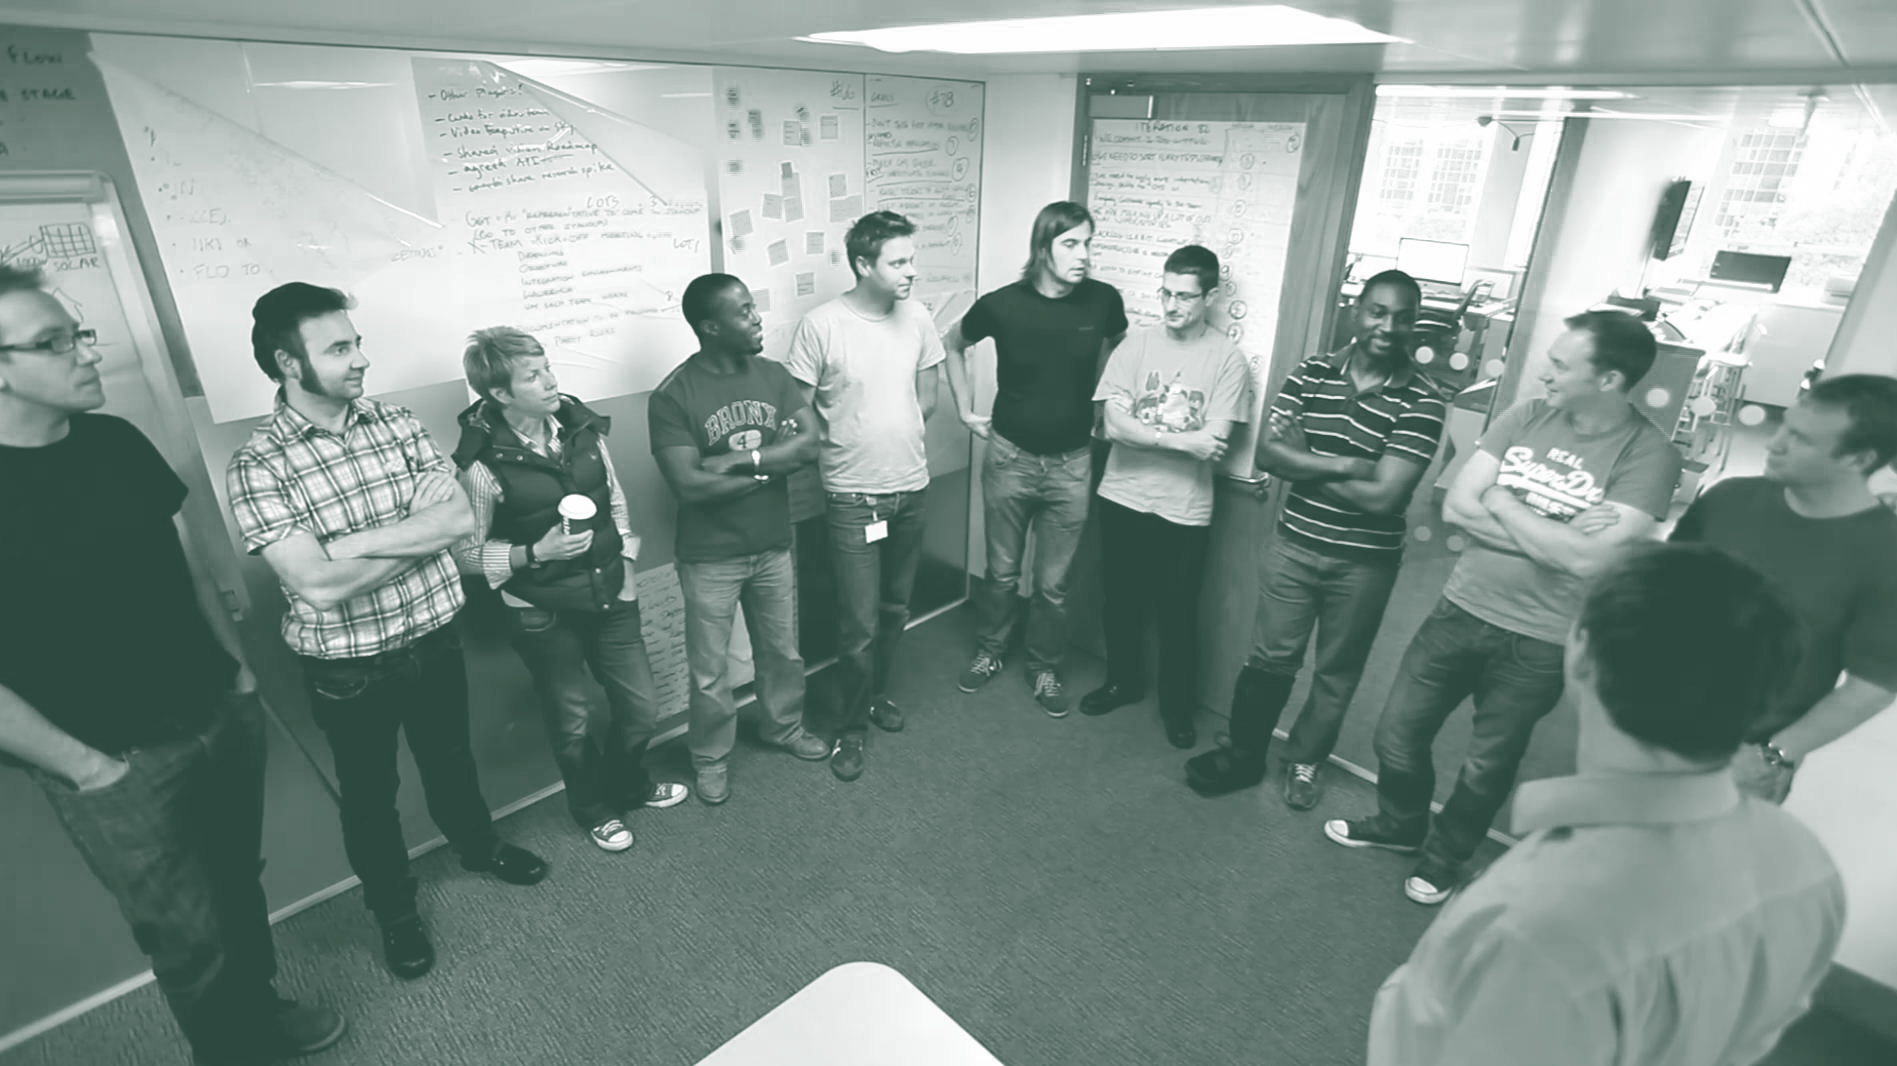 Daily scrum stand-up